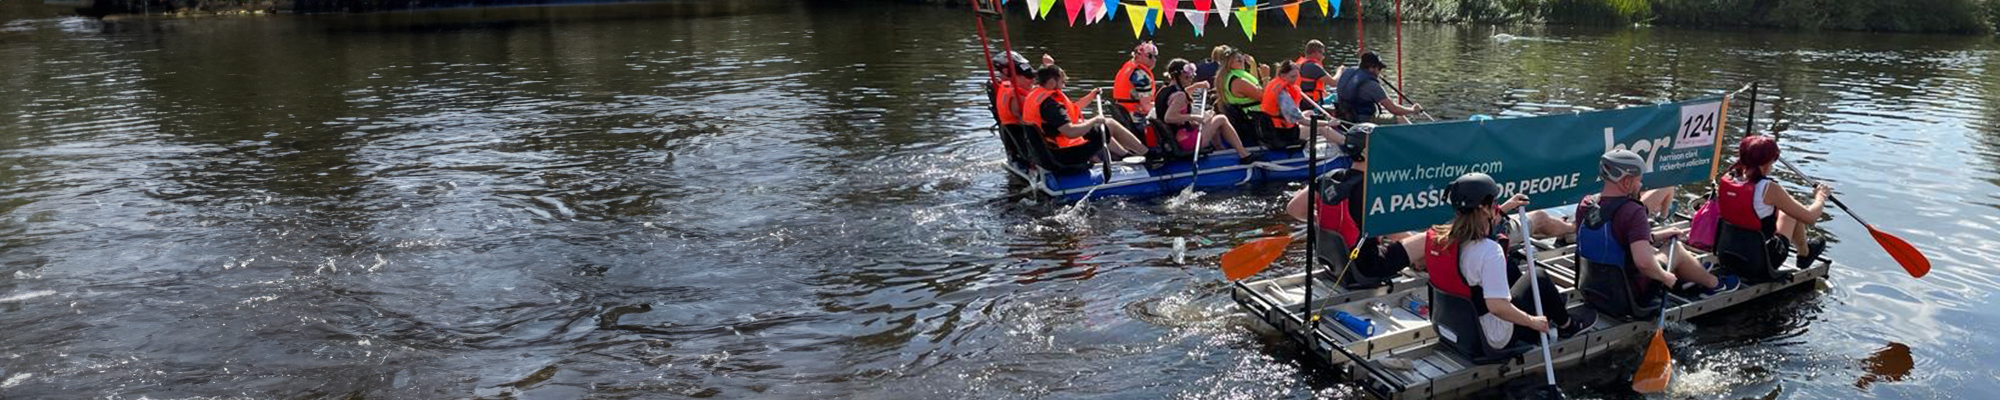 Member of the Wye Valley team taking part in a raft race